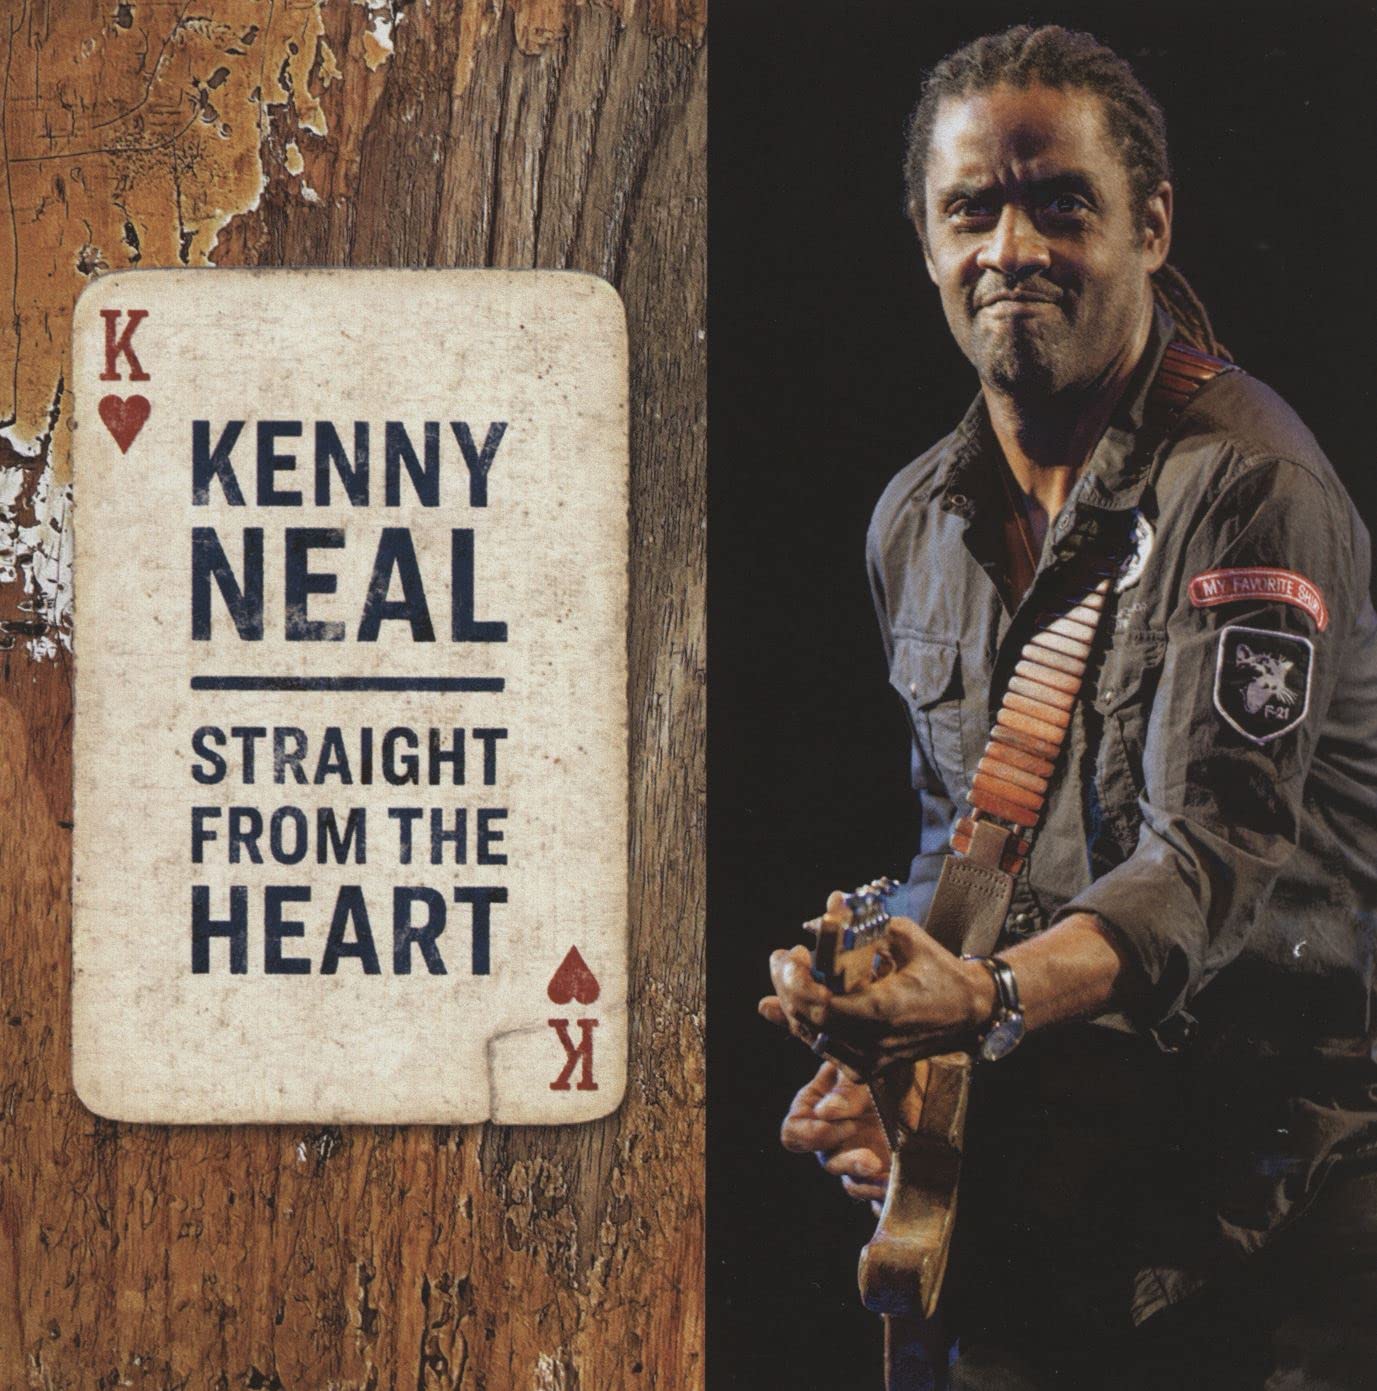 KENNY NEAL - Straight From the Heart